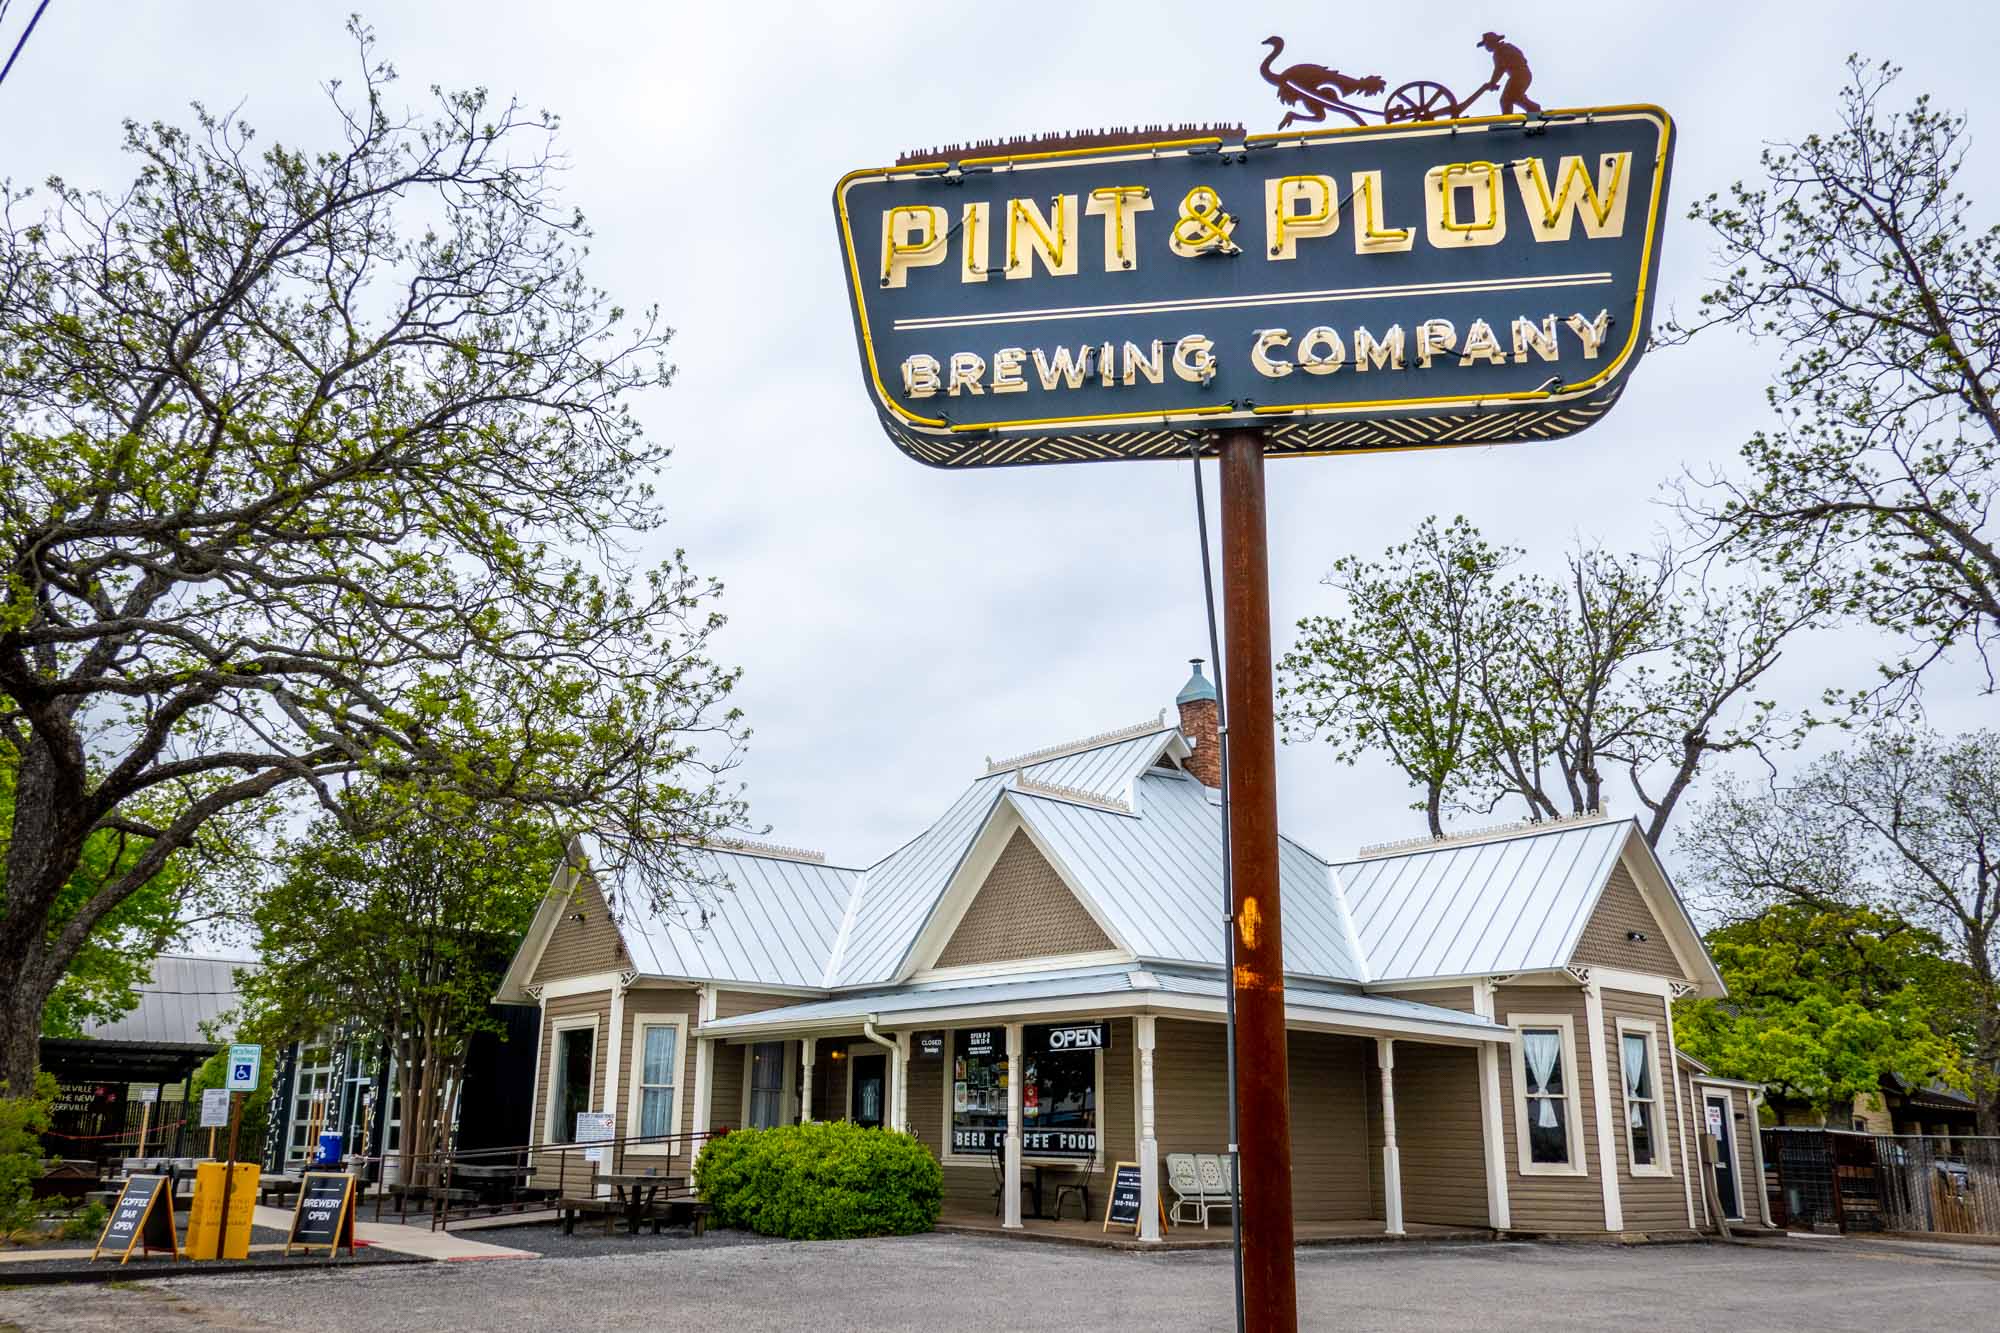 Blue and yellow neon sign for Pint & Plow Brewing Company outside a one-story building